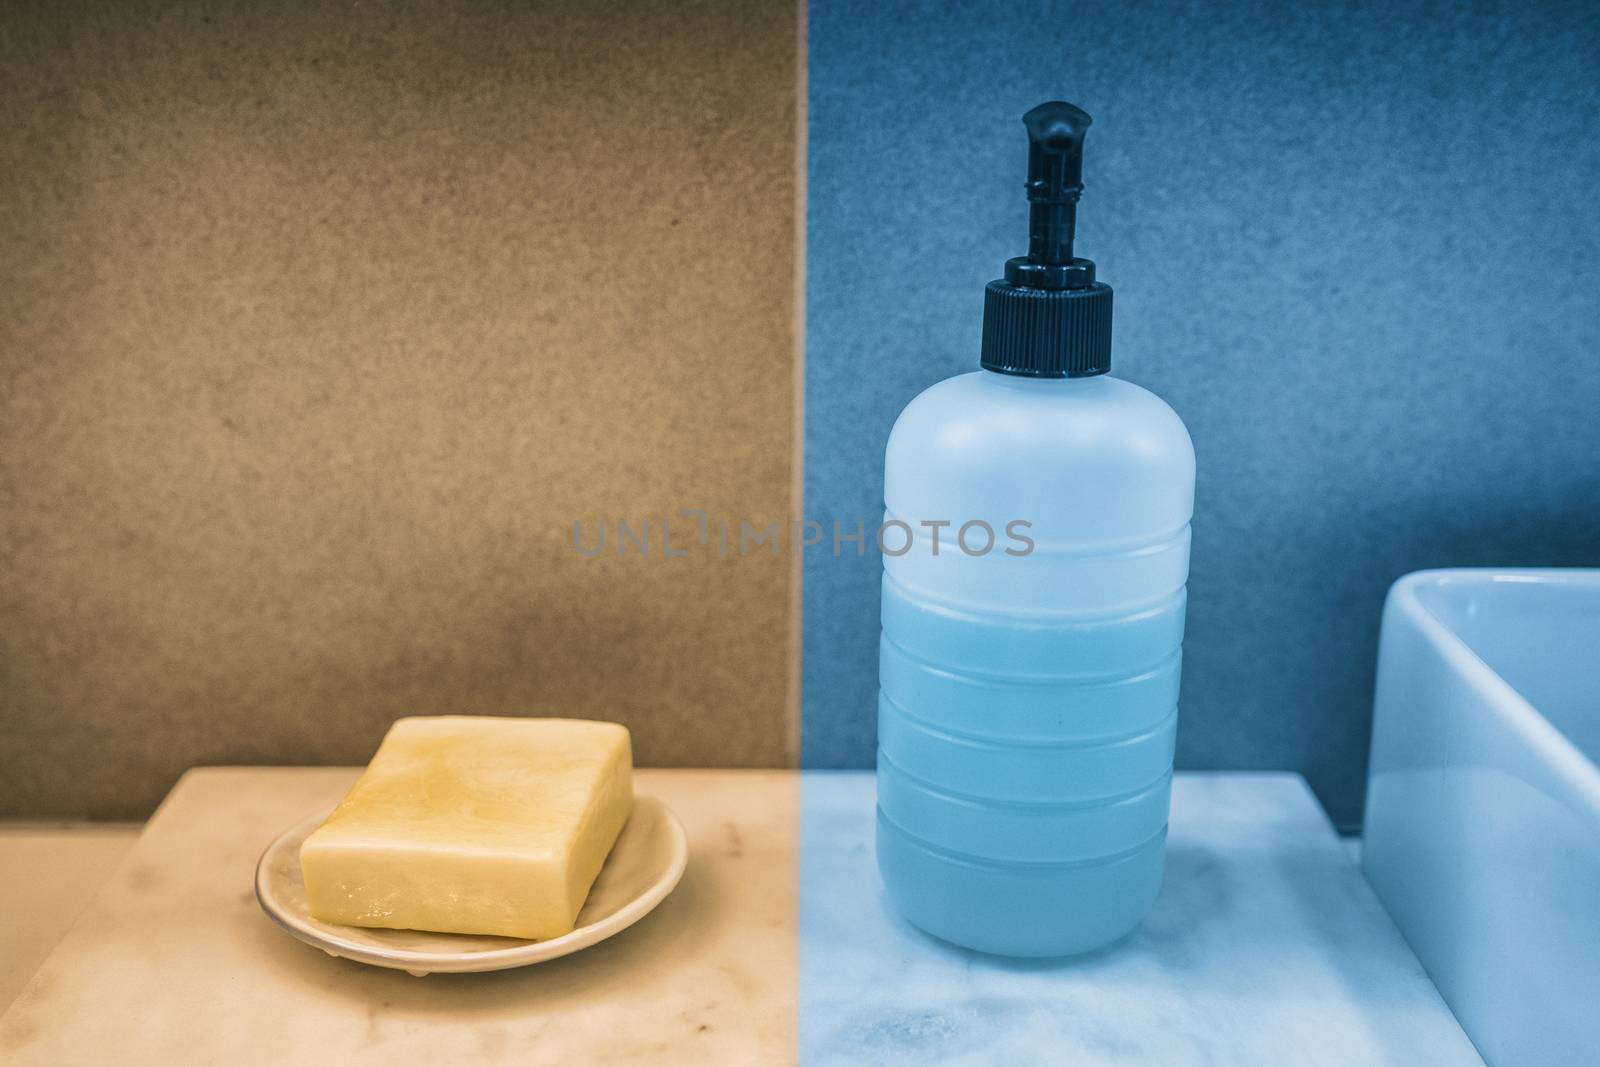 Soap bar versus liquid hand soap bottle comparison of hand washing products on home bathroom vanity. Yellow and blue color boxes to compare by Maridav